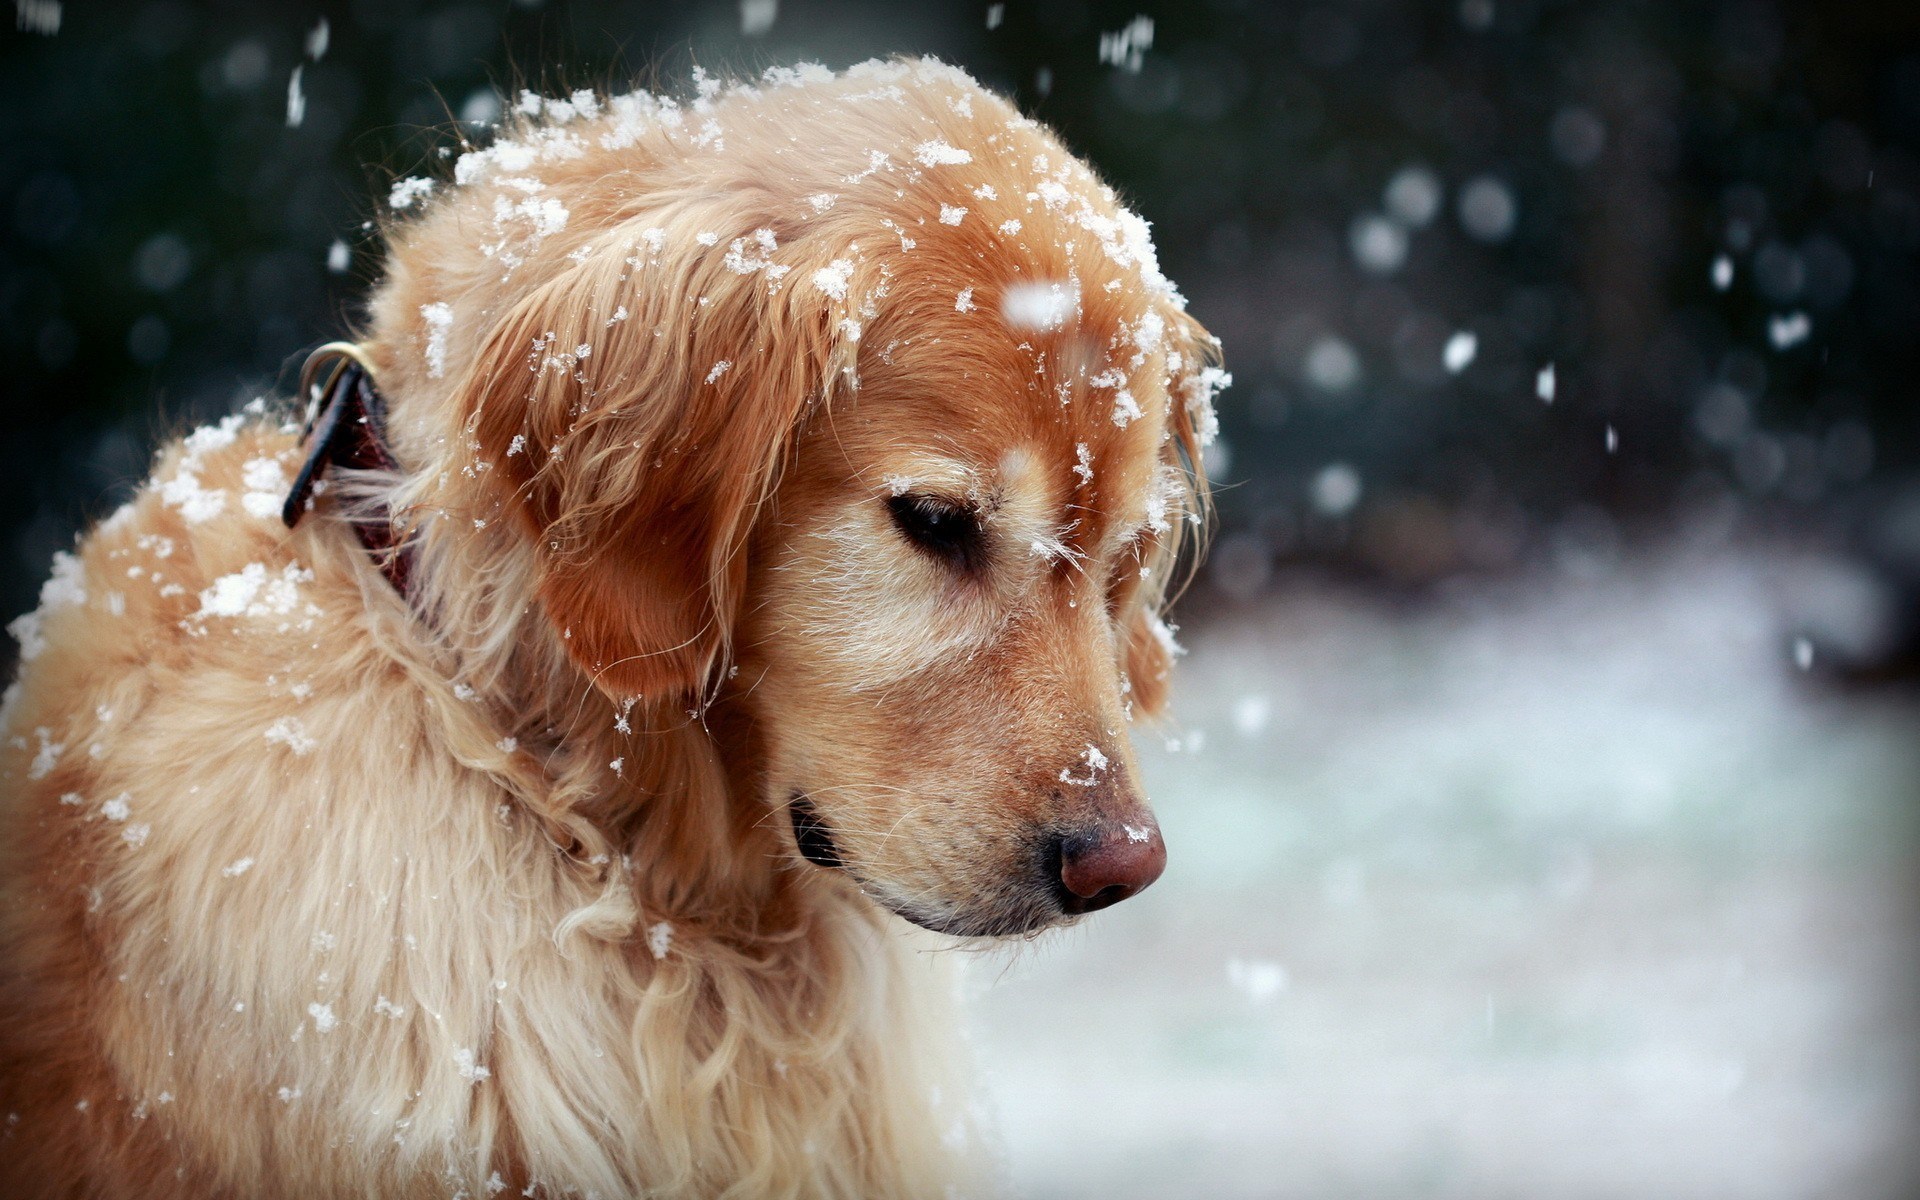 dog wallpapers snow winter